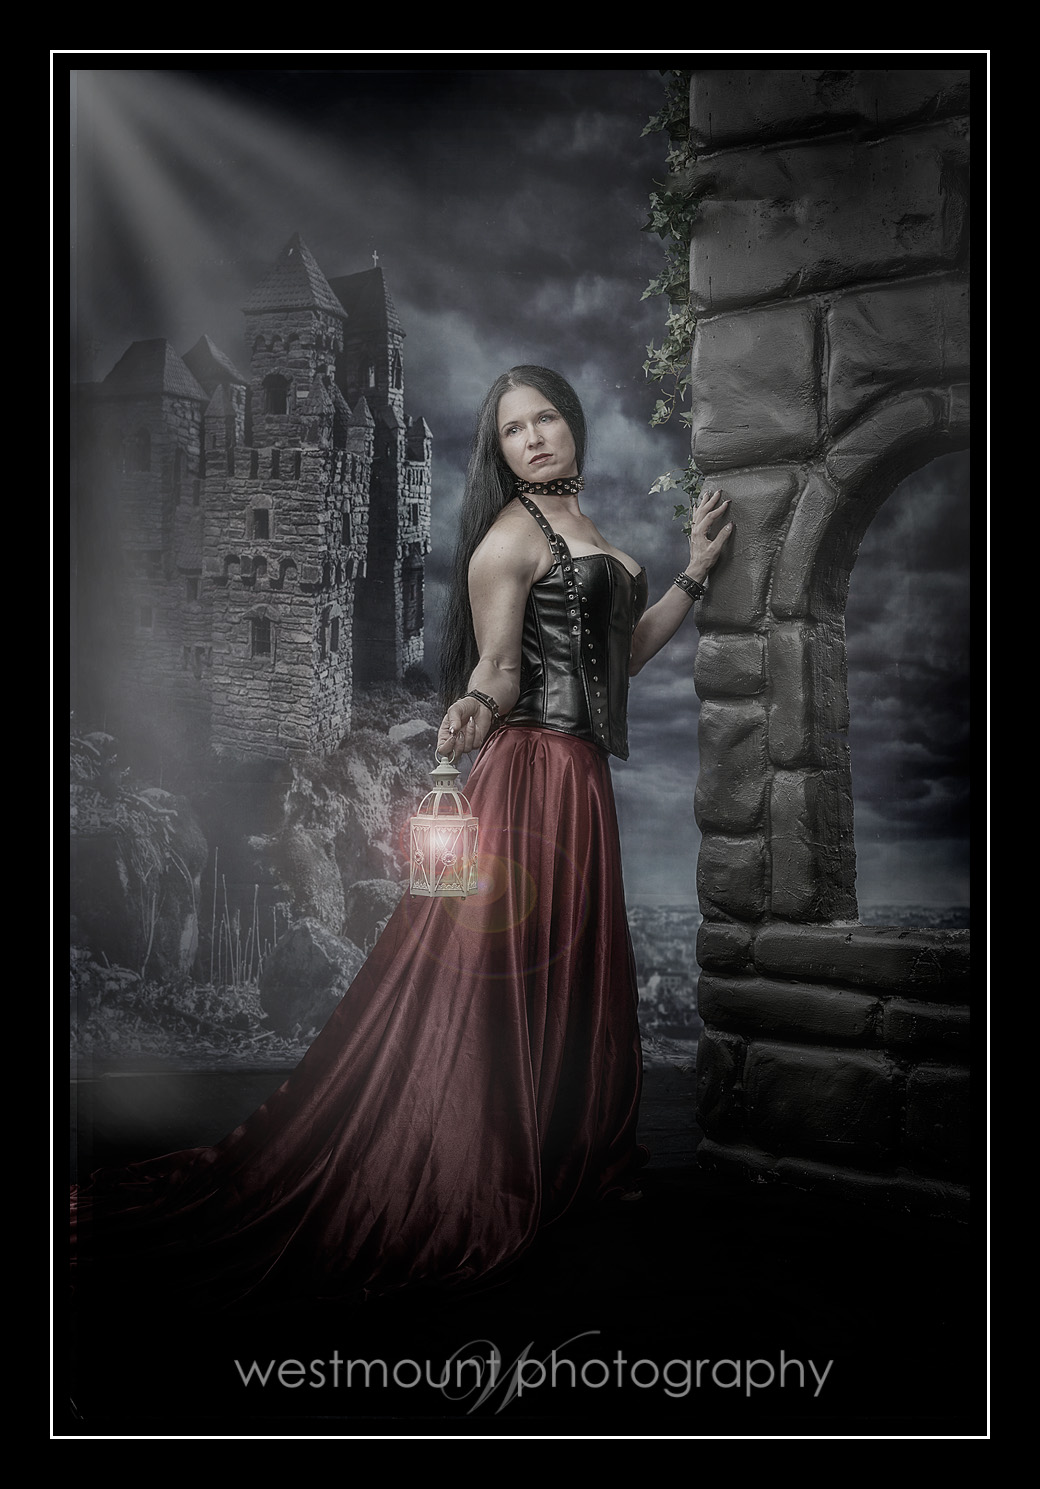 Medieval themed portraits for adults…